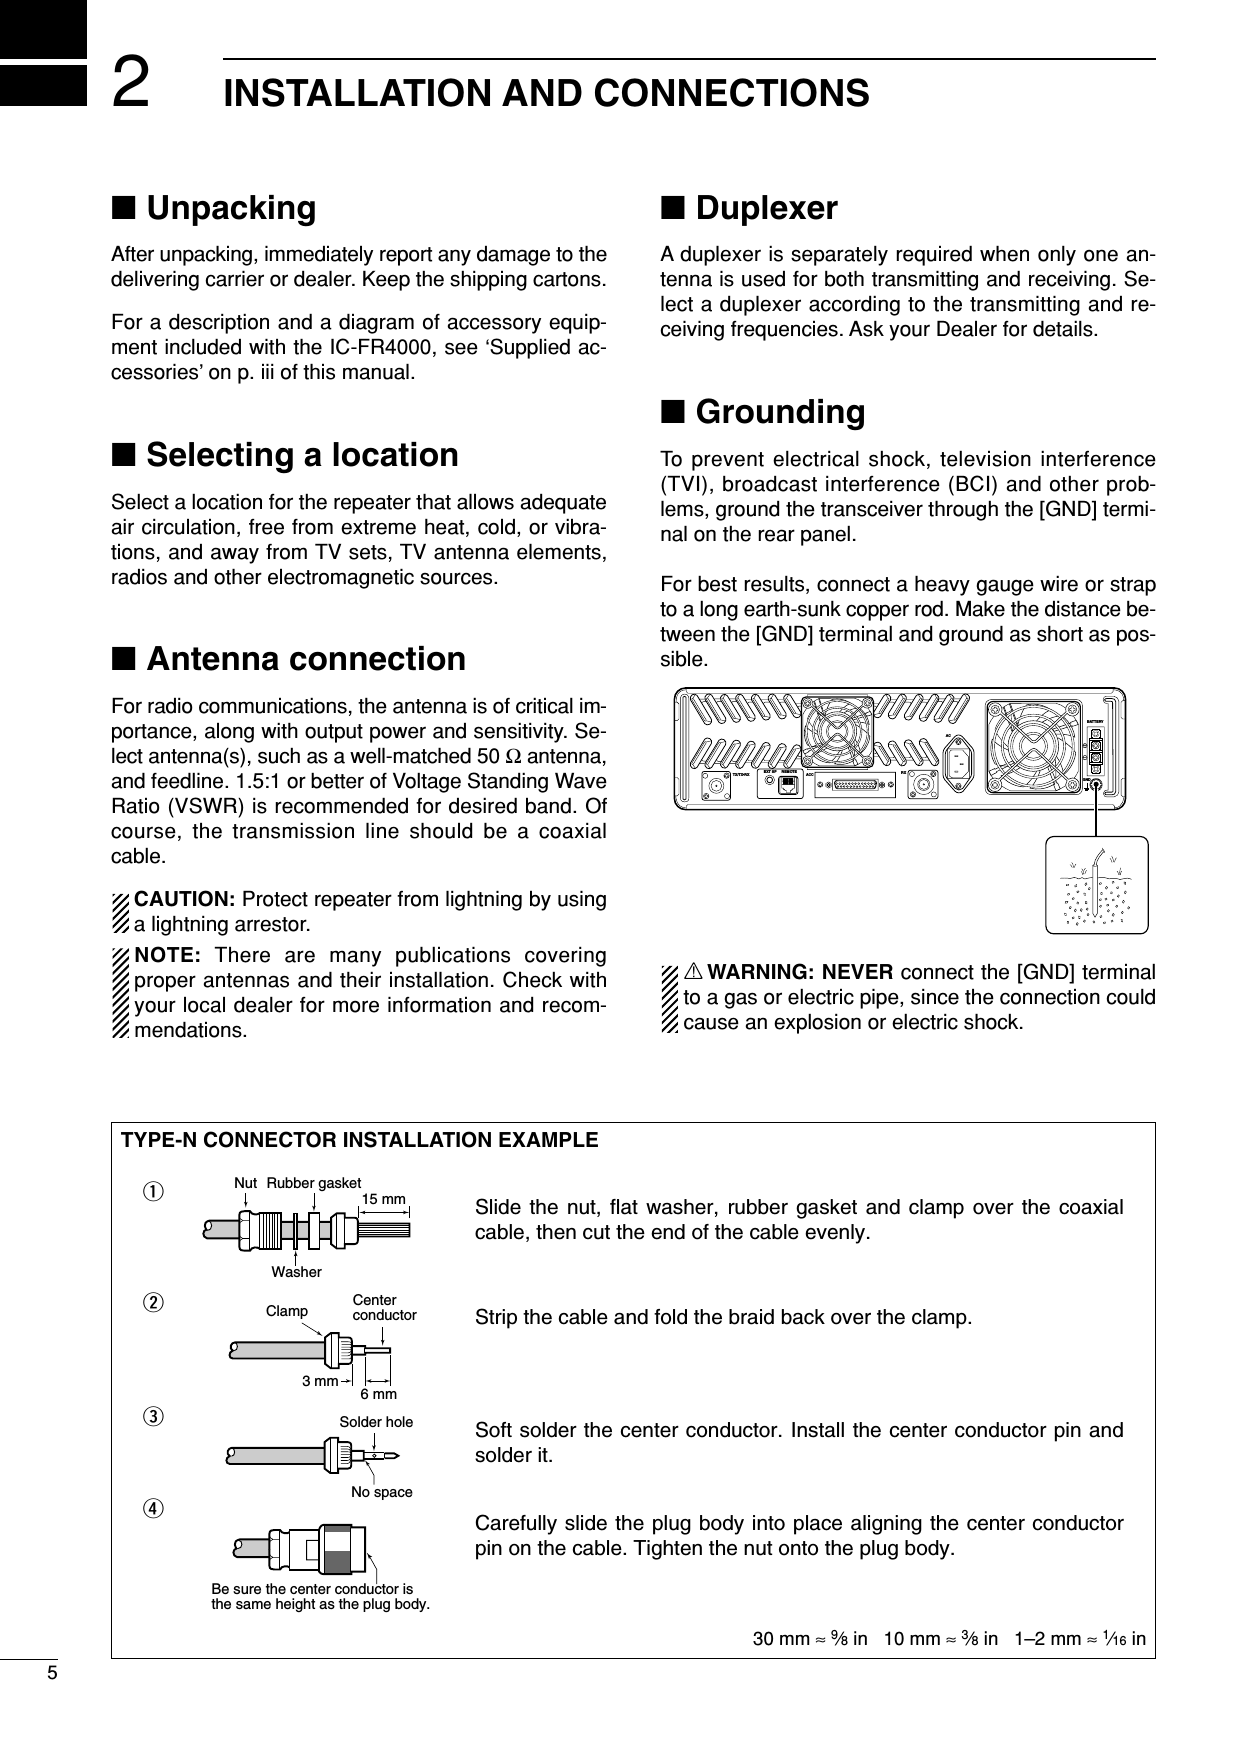 25INSTALLATION AND CONNECTIONS■UnpackingAfter unpacking, immediately report any damage to thedelivering carrier or dealer. Keep the shipping cartons.For a description and a diagram of accessory equip-ment included with the IC-FR4000, see ‘Supplied ac-cessories’ on p. iii of this manual.■Selecting a locationSelect a location for the repeater that allows adequateair circulation, free from extreme heat, cold, or vibra-tions, and away from TV sets, TV antenna elements,radios and other electromagnetic sources.■Antenna connectionFor radio communications, the antenna is of critical im-portance, along with output power and sensitivity. Se-lect antenna(s), such as a well-matched 50 Ωantenna,and feedline. 1.5:1 or better of Voltage Standing WaveRatio (VSWR) is recommended for desired band. Ofcourse, the transmission line should be a coaxialcable.CAUTION: Protect repeater from lightning by usinga lightning arrestor.NOTE: There are many publications coveringproper antennas and their installation. Check withyour local dealer for more information and recom-mendations.■DuplexerA duplexer is separately required when only one an-tenna is used for both transmitting and receiving. Se-lect a duplexer according to the transmitting and re-ceiving frequencies. Ask your Dealer for details.■GroundingTo prevent electrical shock, television interference(TVI), broadcast interference (BCI) and other prob-lems, ground the transceiver through the [GND] termi-nal on the rear panel.For best results, connect a heavy gauge wire or strapto a long earth-sunk copper rod. Make the distance be-tween the [GND] terminal and ground as short as pos-sible.RWARNING: NEVER connect the [GND] terminalto a gas or electric pipe, since the connection couldcause an explosion or electric shock.TX/TX•RXEXT SP REMOTEACC RXGNDACBATTERYTYPE-N CONNECTOR INSTALLATION EXAMPLE30 mm ≈9⁄8in   10 mm ≈3⁄8in   1–2 mm ≈1⁄16 inSlide the nut, flat washer, rubber gasket and clamp over the coaxial cable, then cut the end of the cable evenly.Strip the cable and fold the braid back over the clamp.Soft solder the center conductor. Install the center conductor pin and solder it.Carefully slide the plug body into place aligning the center conductor pin on the cable. Tighten the nut onto the plug body.qwer15 mm3 mm 6 mmNo spaceSolder holeBe sure the center conductor is the same height as the plug body.Clamp CenterconductorWasherNut Rubber gasket